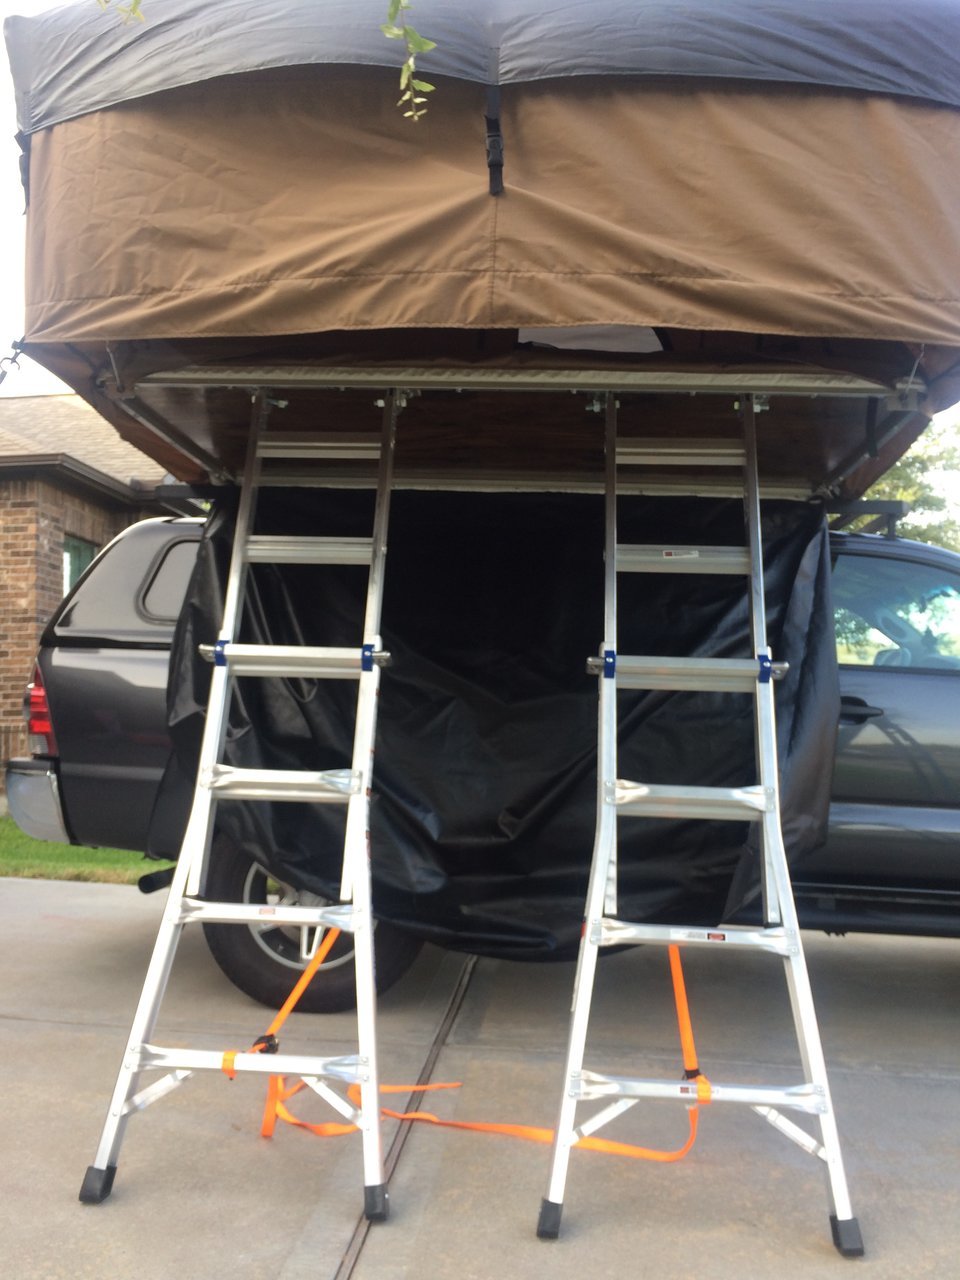 Sold Snug Top Camper Shell Roof Rack Tent Full System Tacoma World